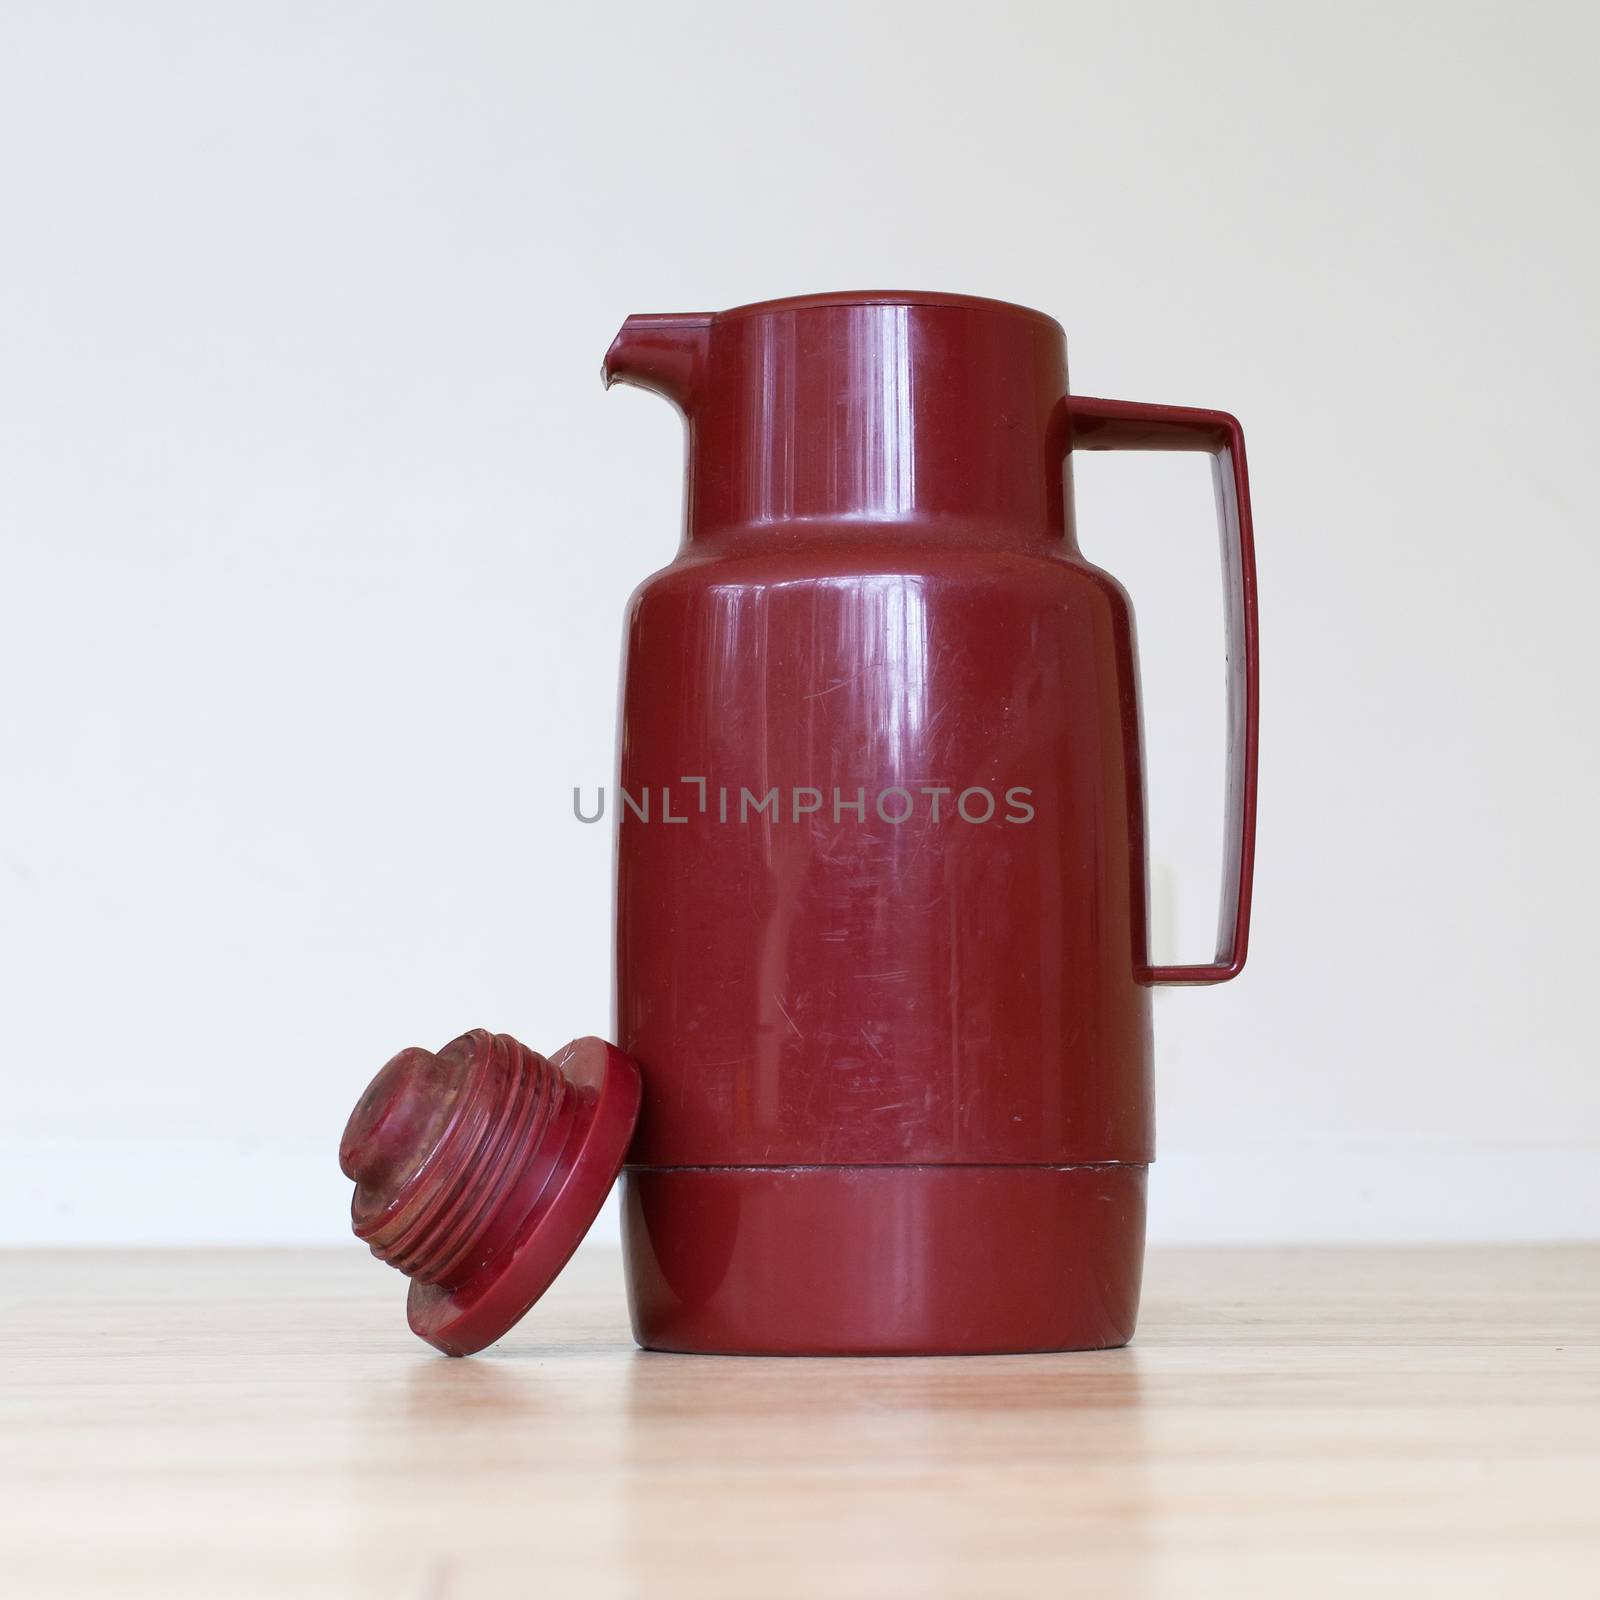 Old coffee tumbler (Thermo bottle) by michaklootwijk